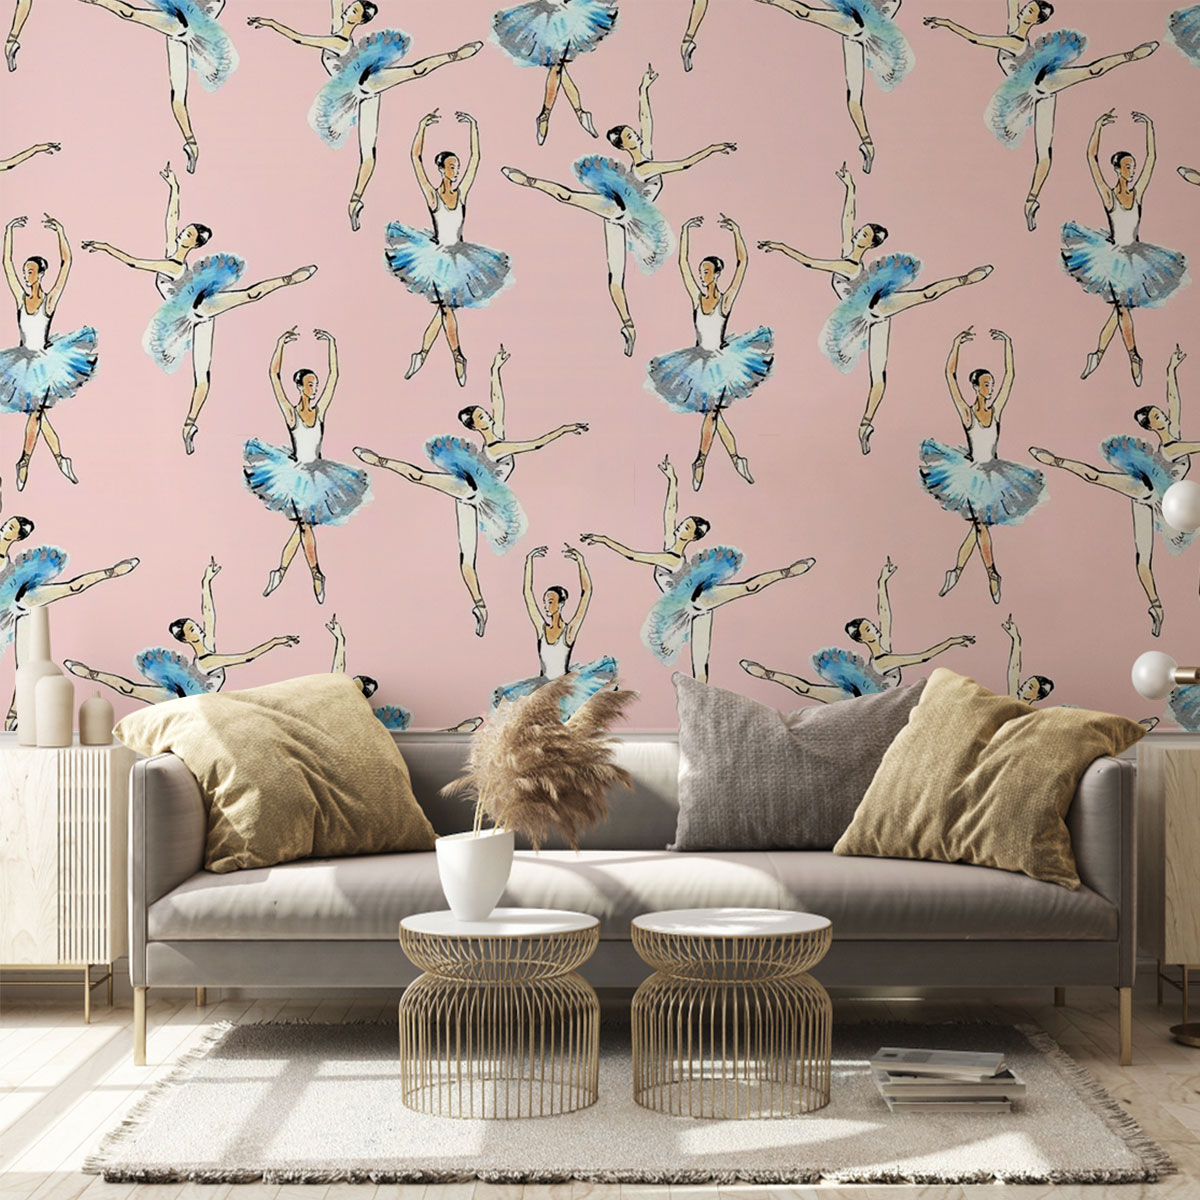 Pink And Blue Ballerina Wall Mural